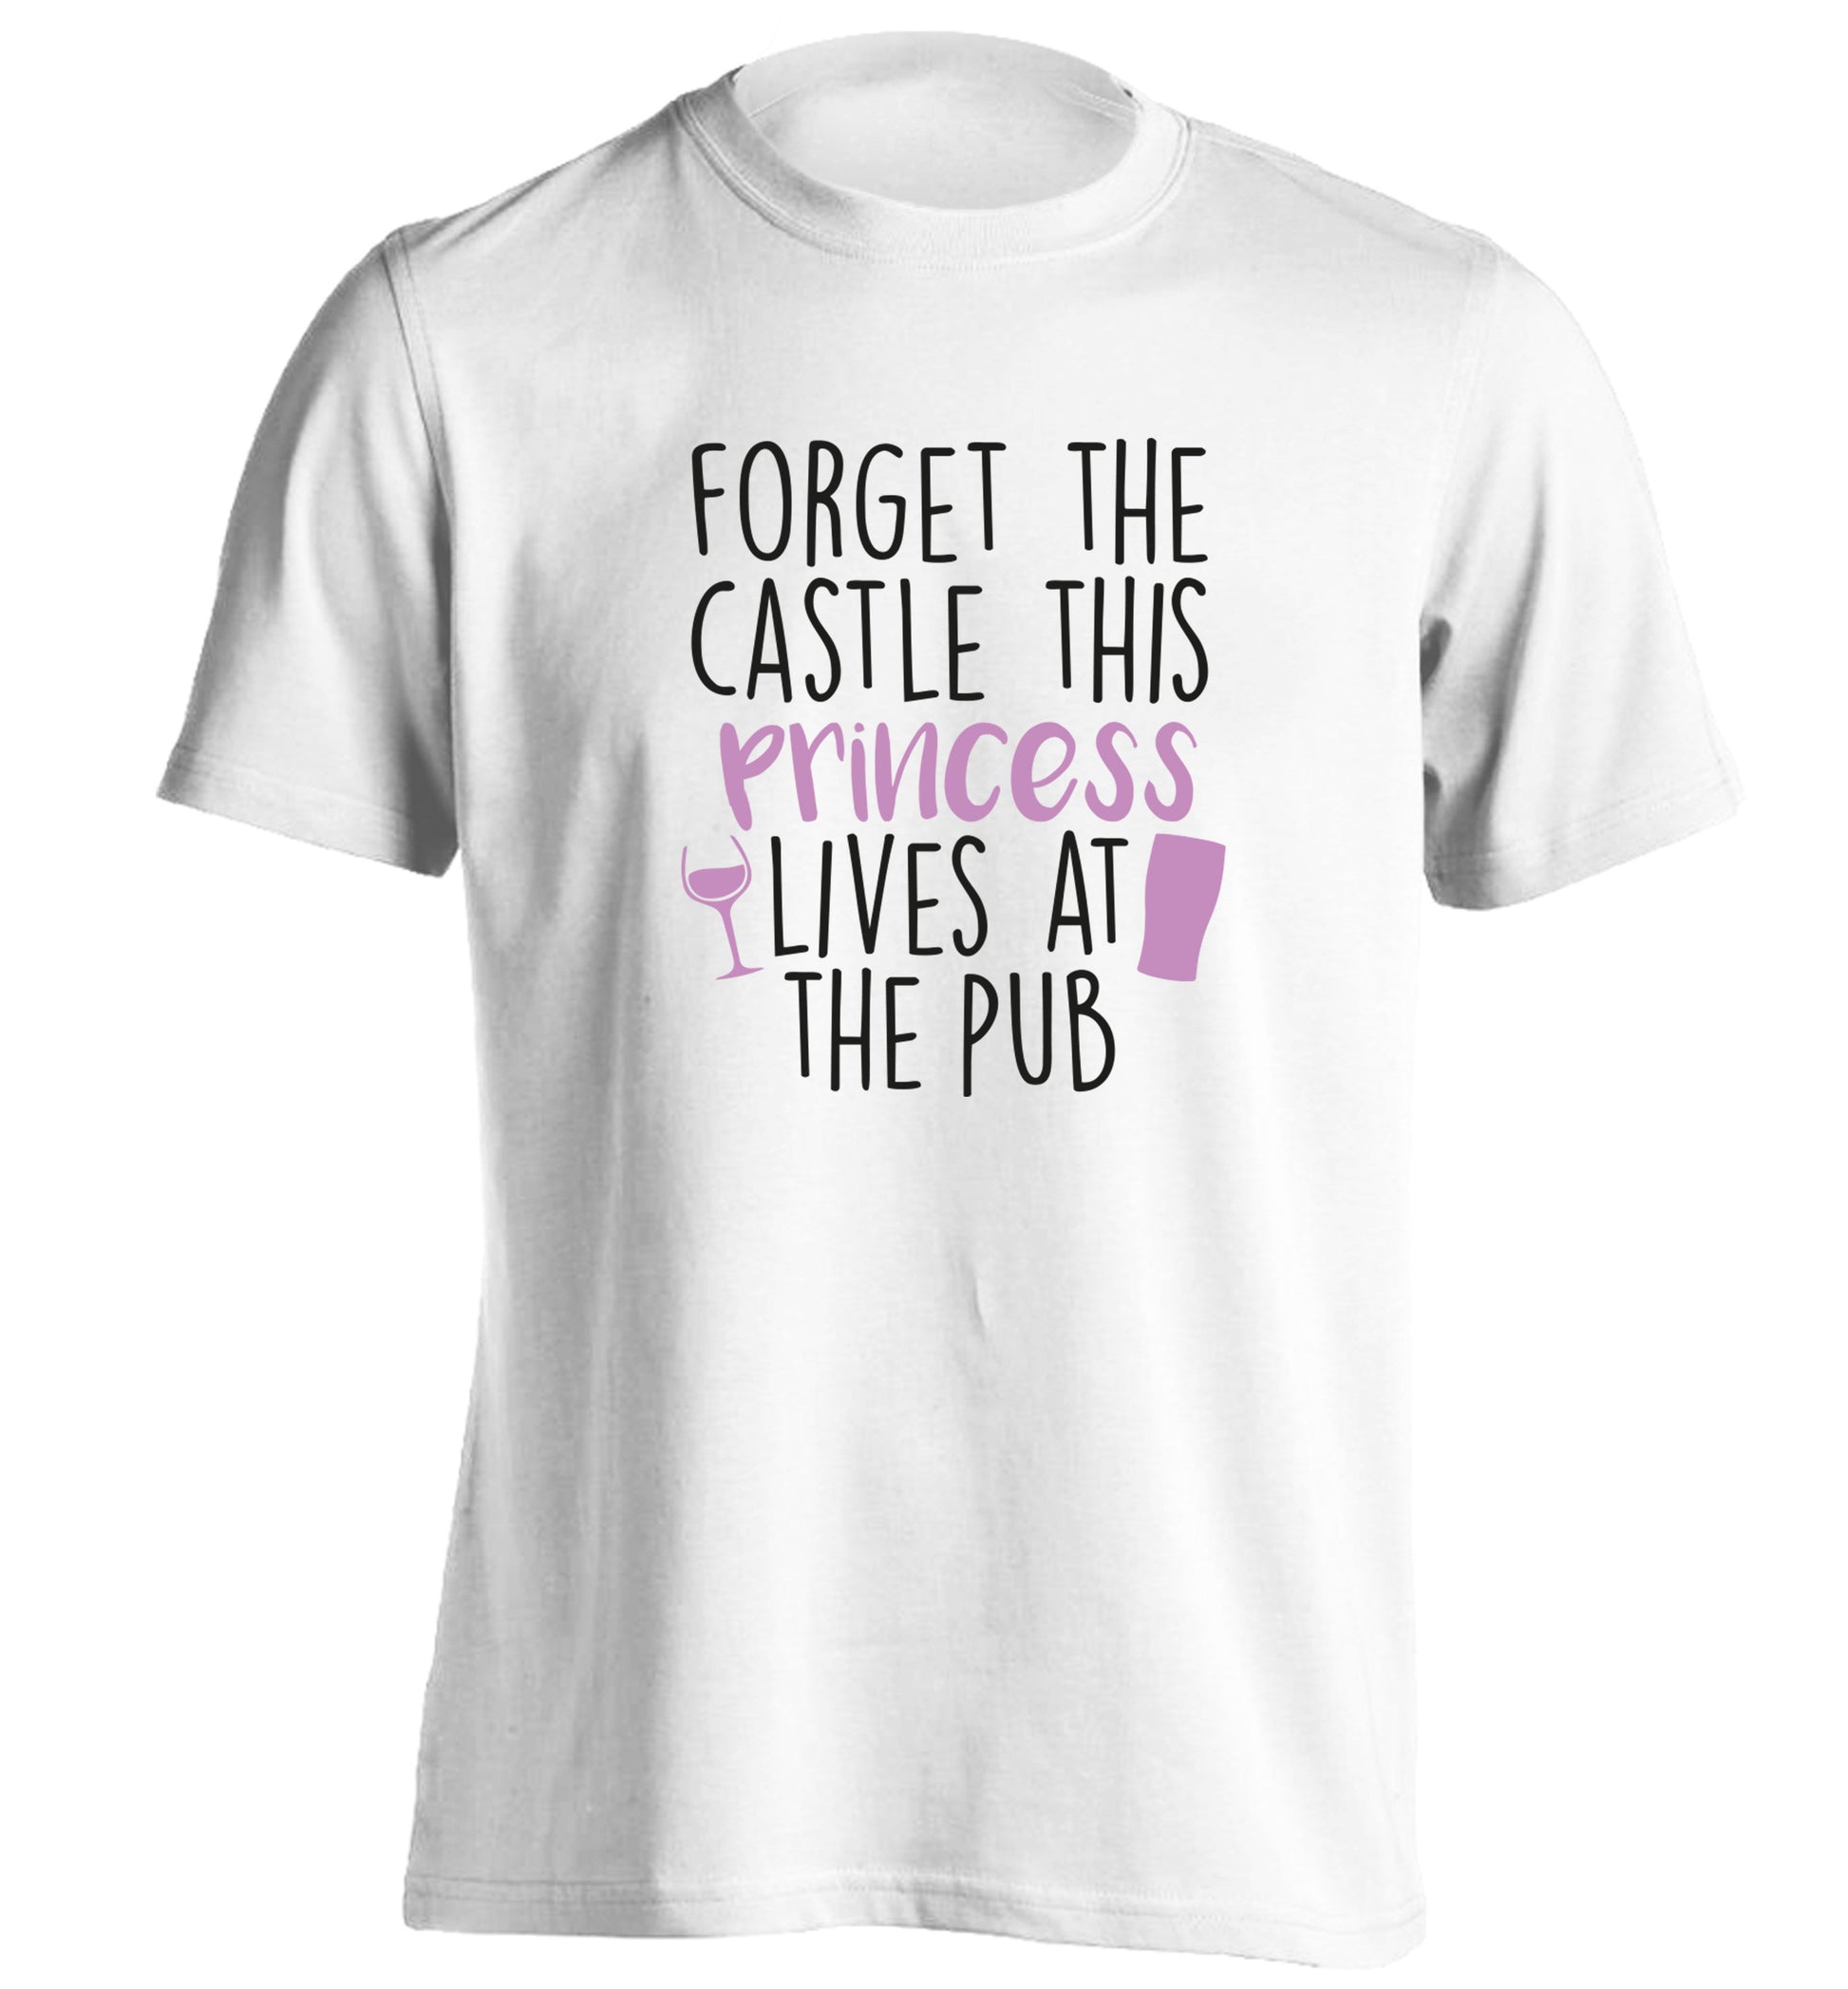 Forget the castle this princess lives at the pub adults unisex white Tshirt 2XL